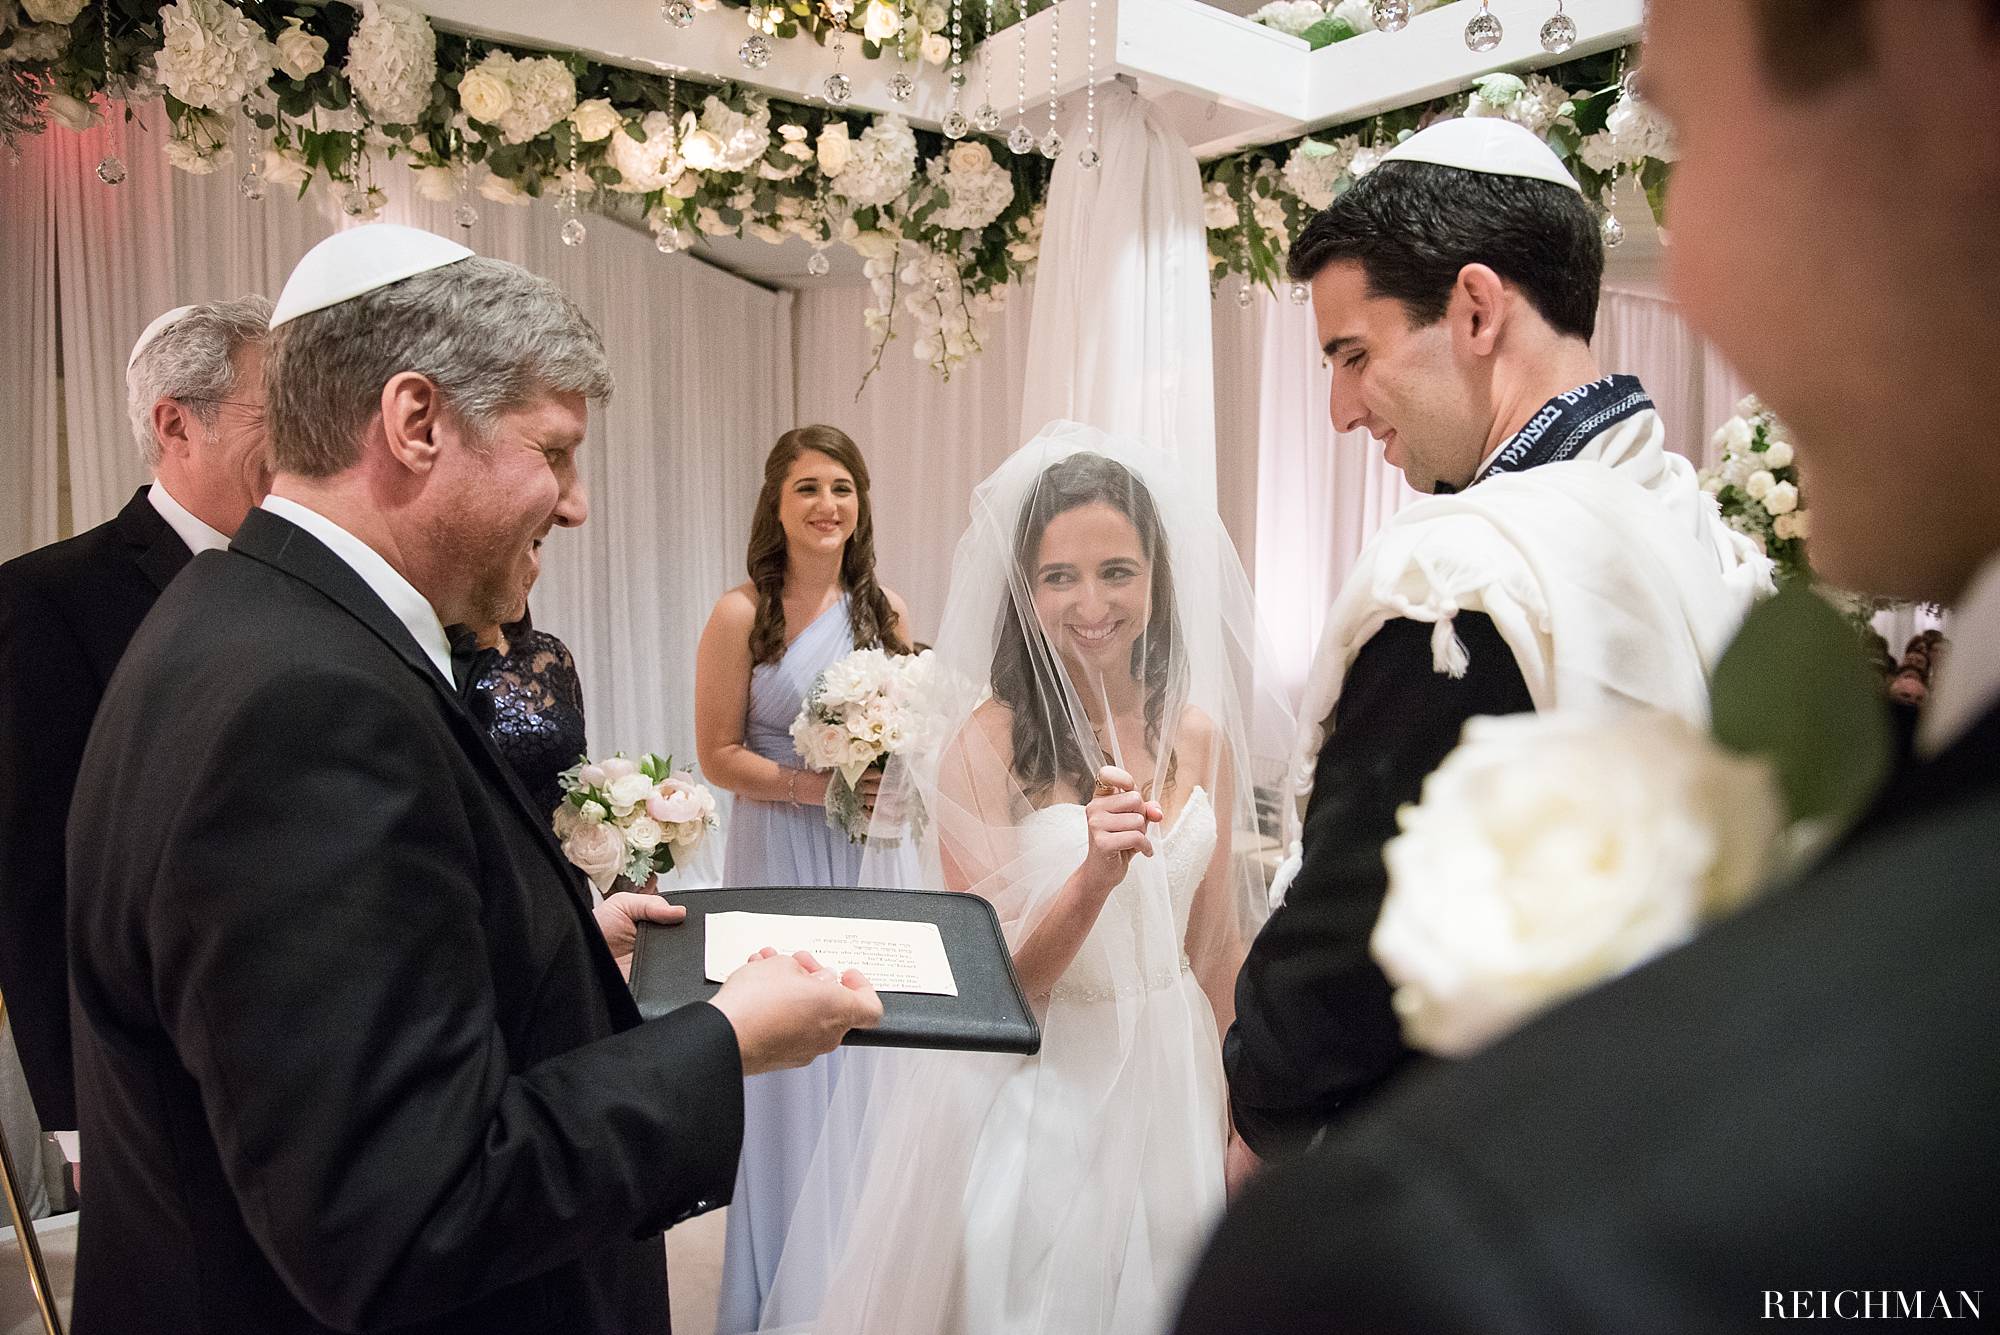 Bride and Groom exchanging rings